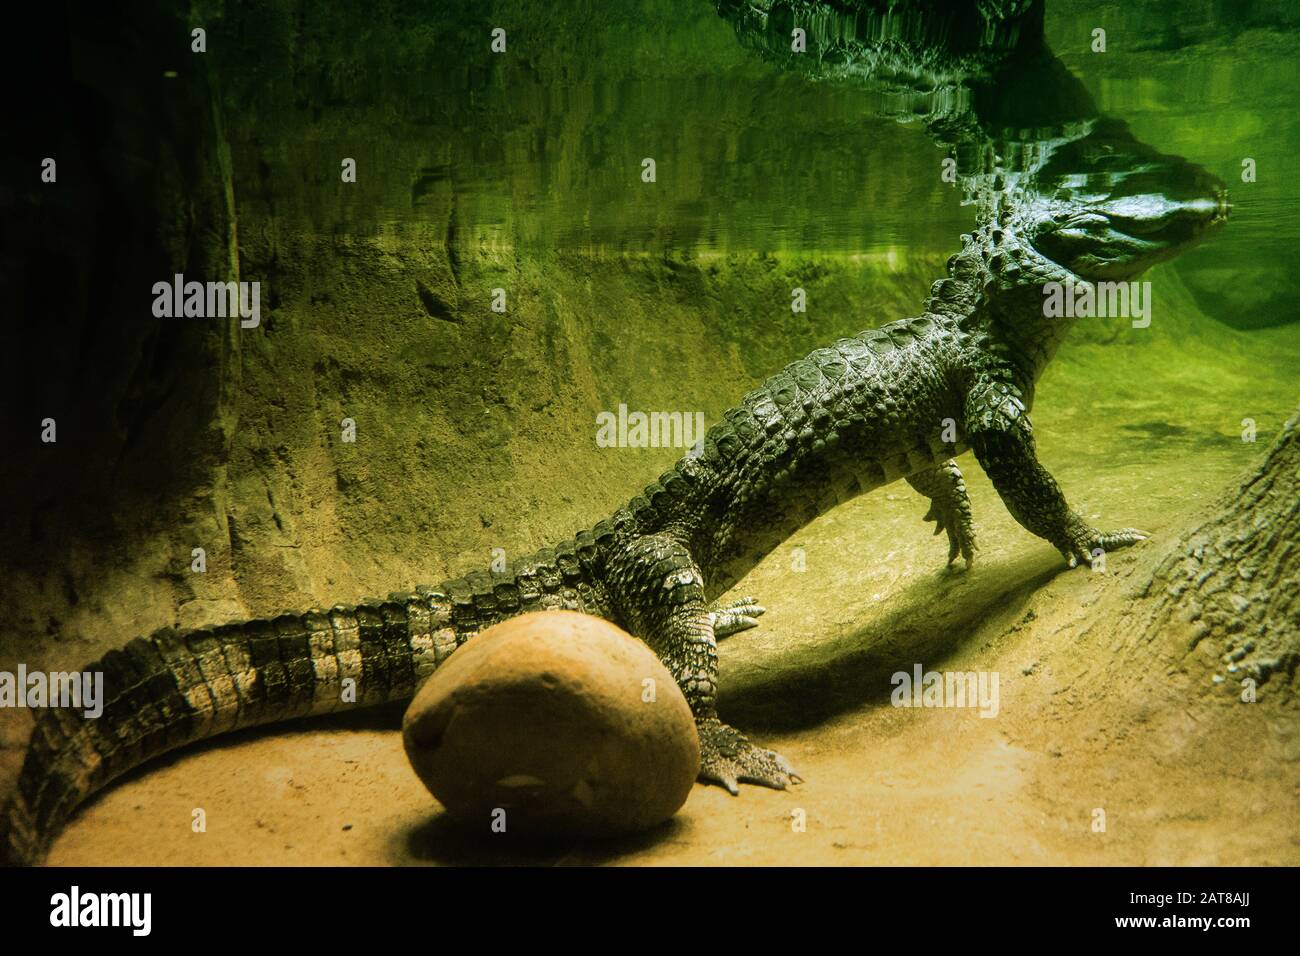 Closeup shot of a crocodile's body underwater with a stone Stock Photo